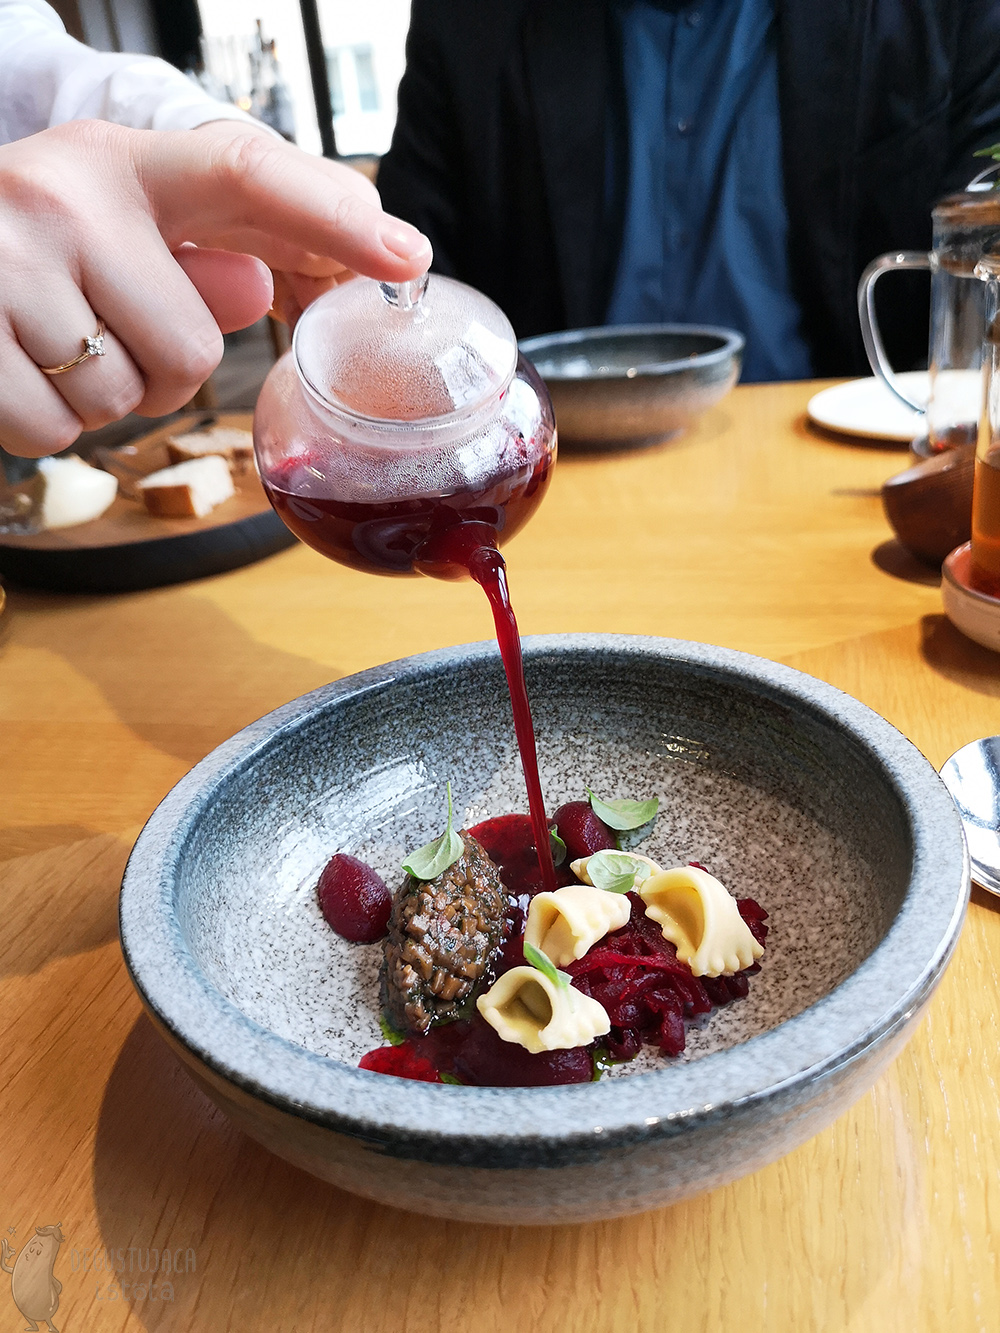 Borscht during pouring from a glass teapot into a stone bowl with small ravioli, beetroot and mushrooms.